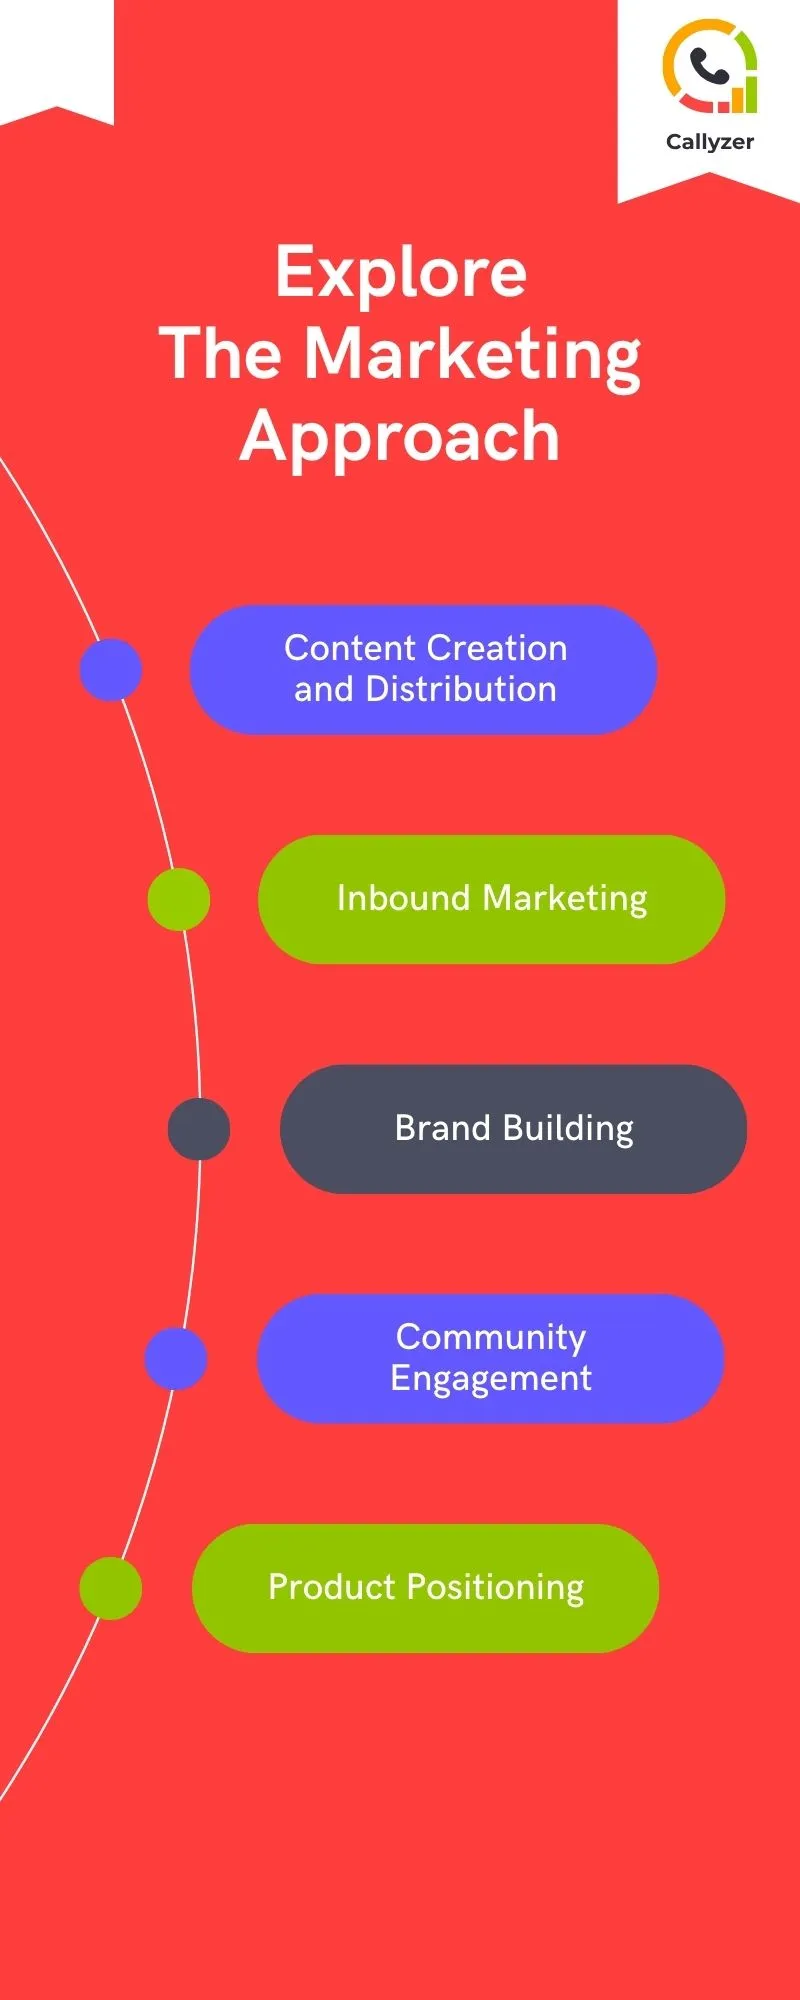 Marketing approach infographic